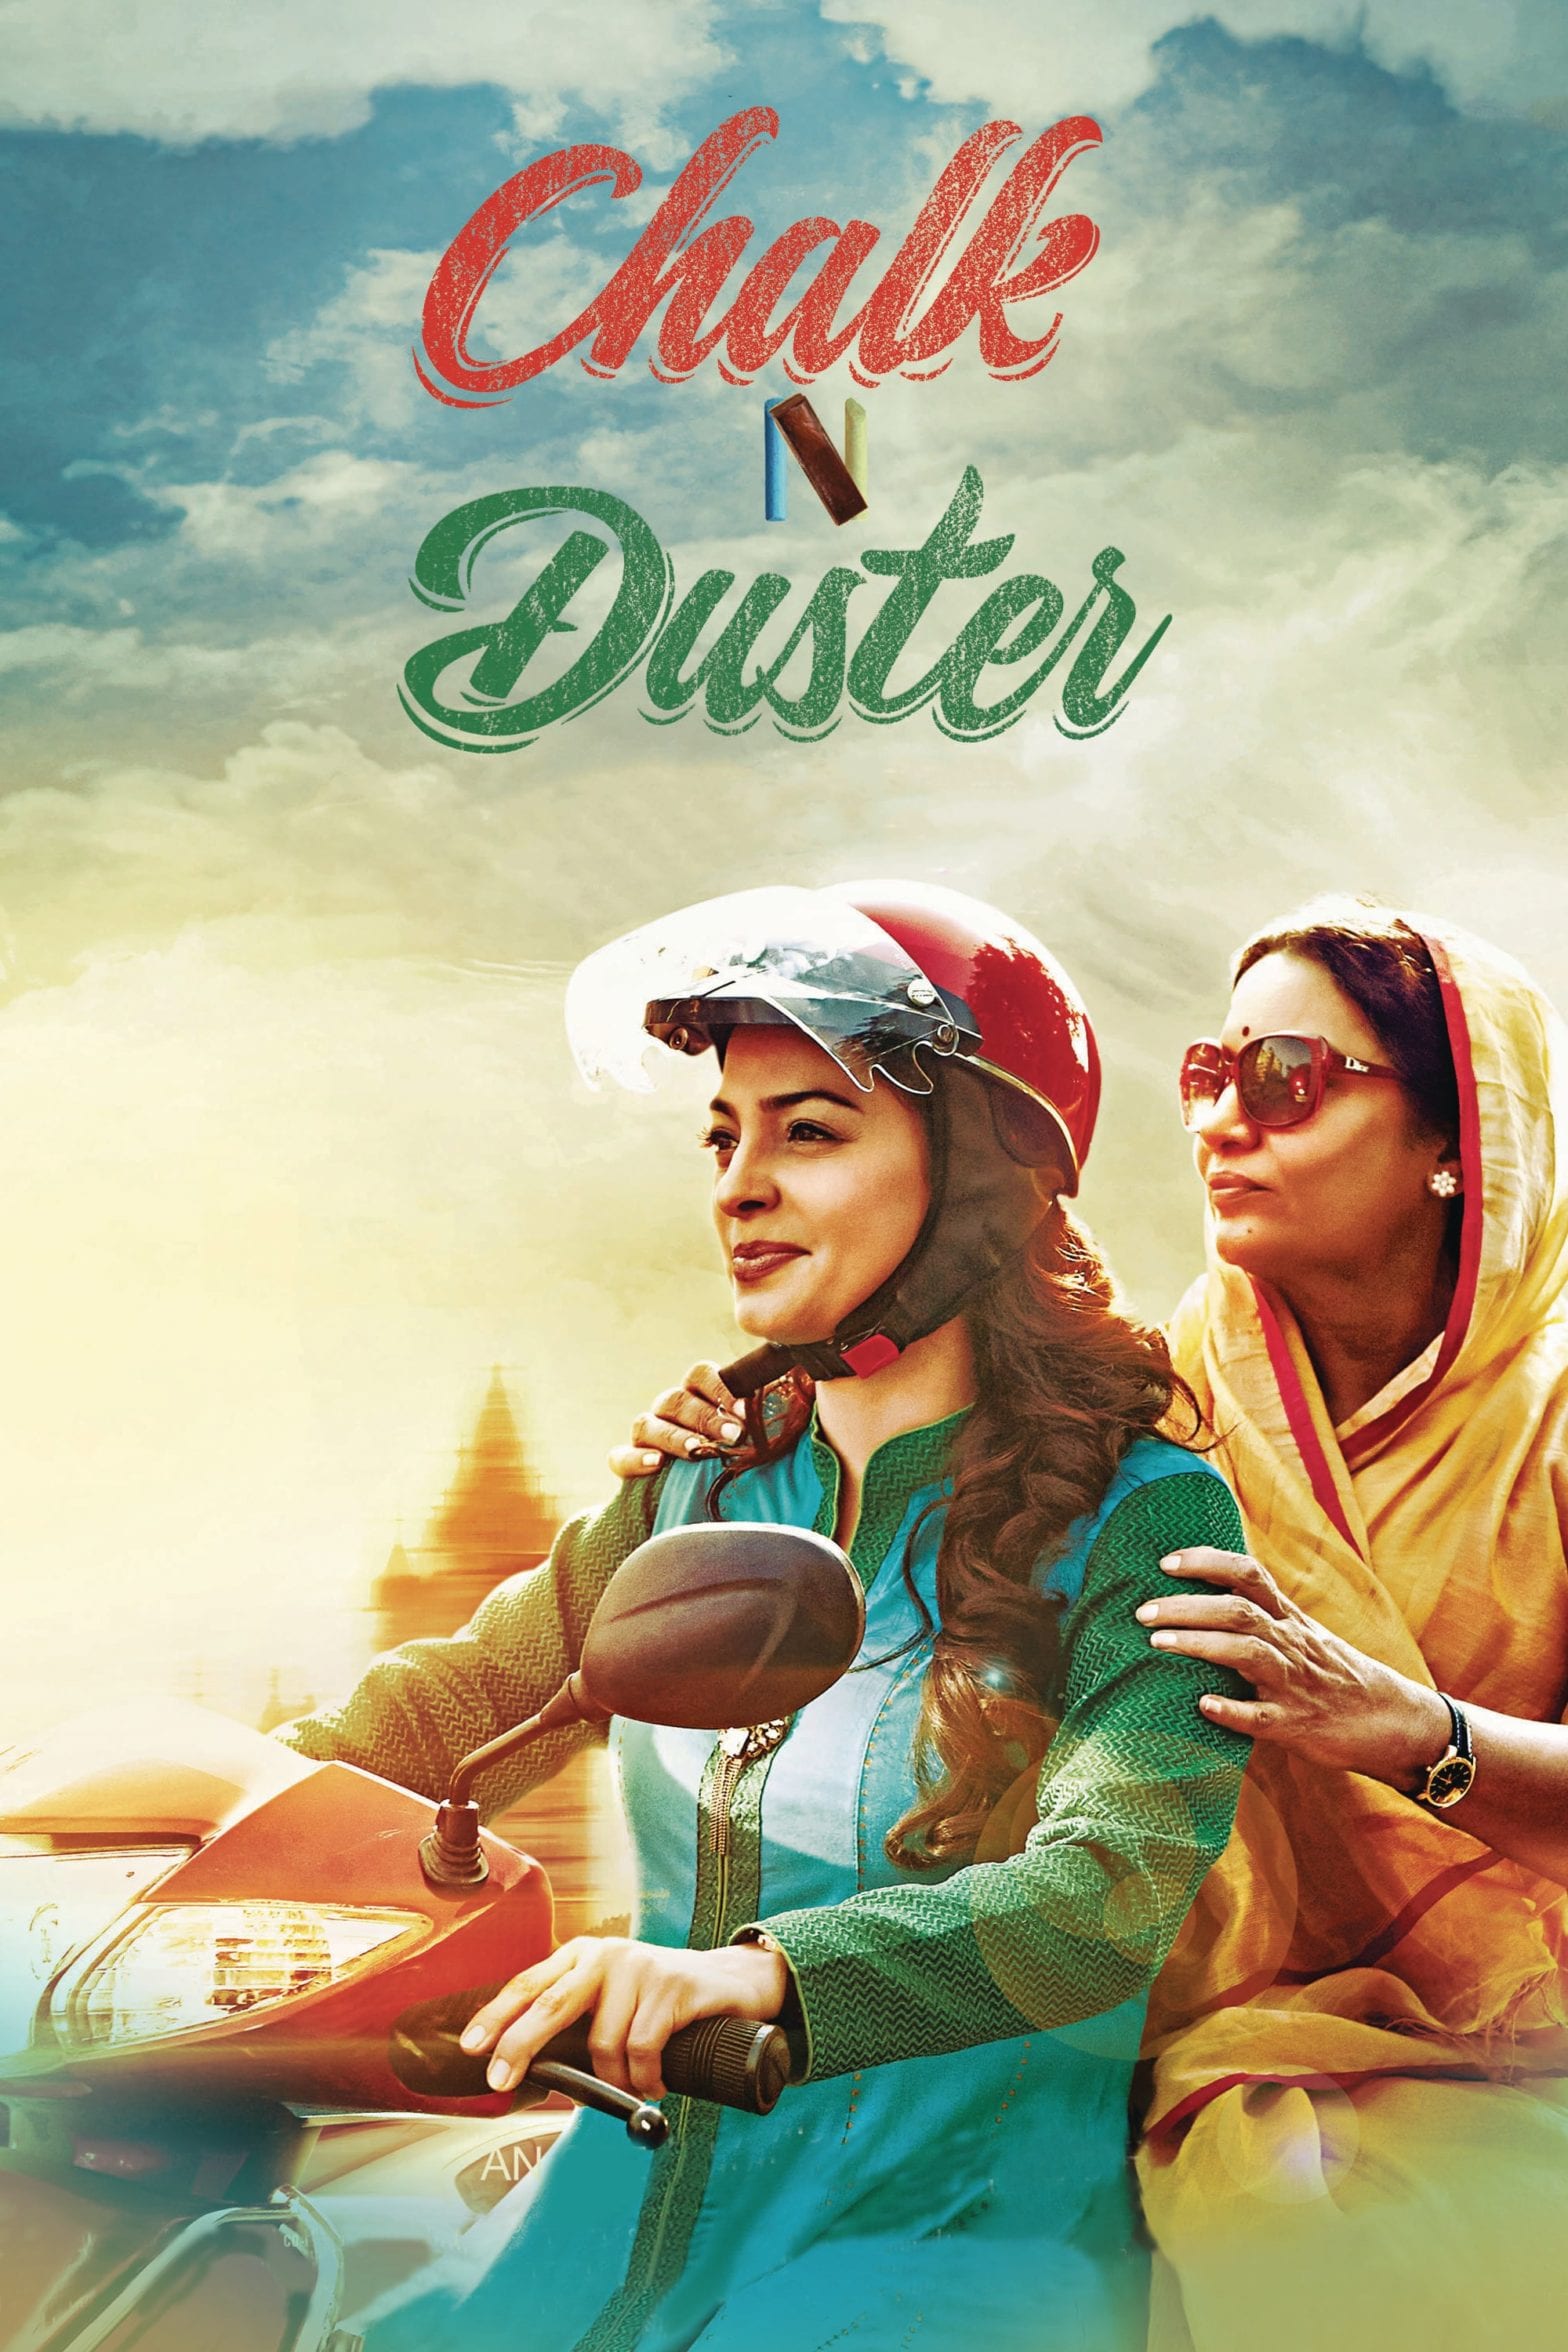 Poster for the movie "Chalk N Duster"